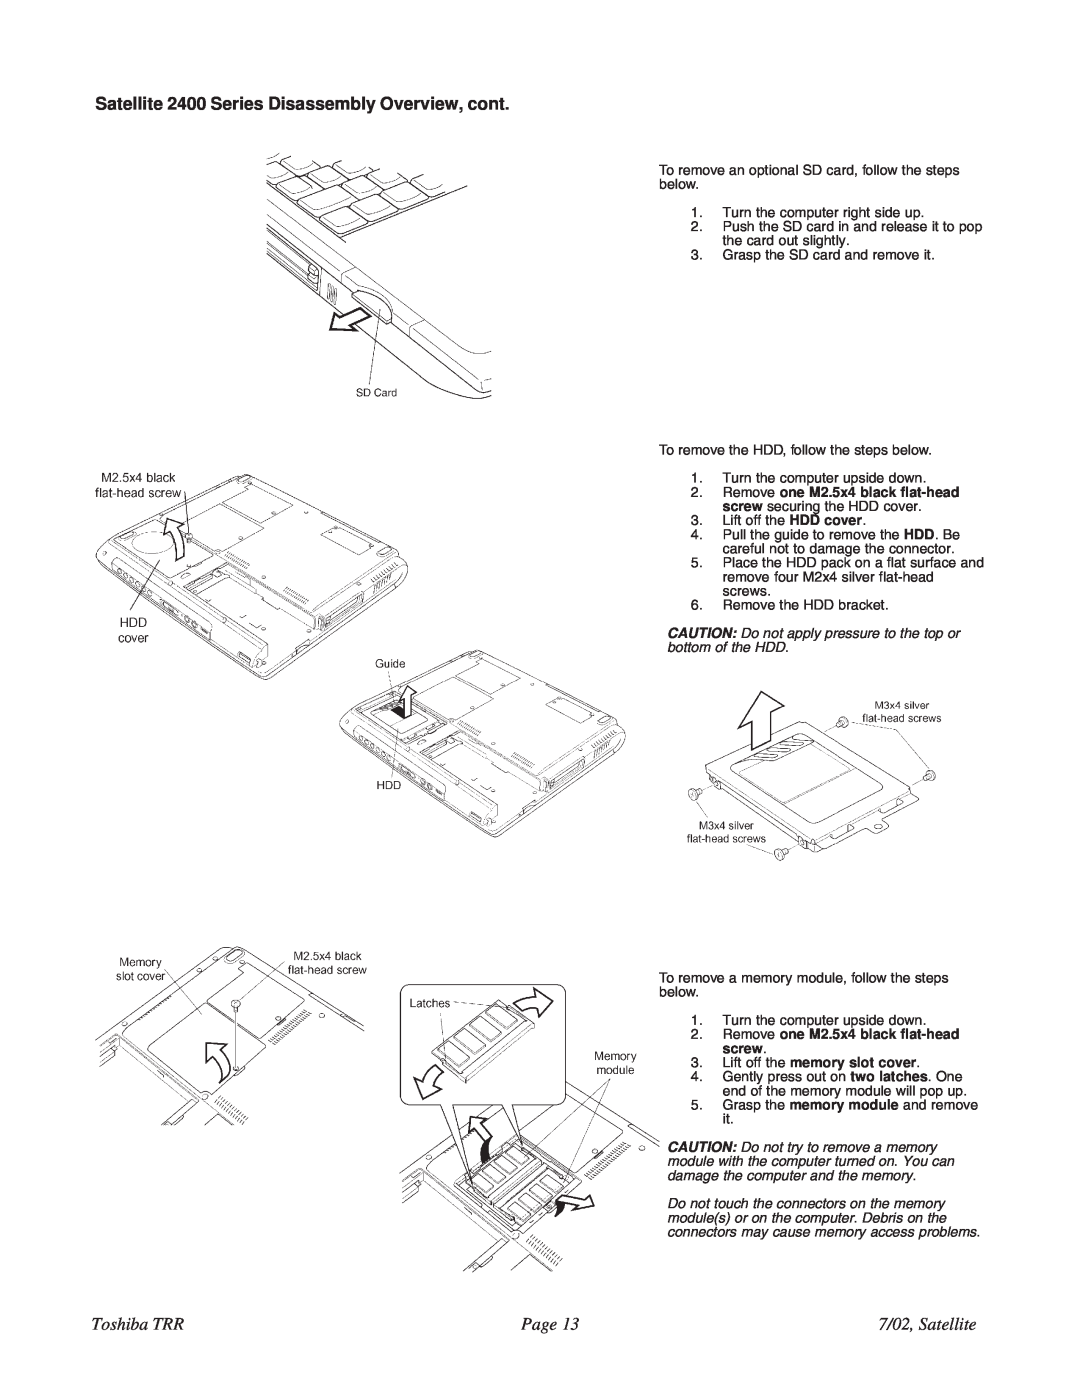 Toshiba 2405-S201 specifications Satellite 2400 Series Disassembly Overview, cont, Toshiba TRR, Page, 7/02, Satellite 